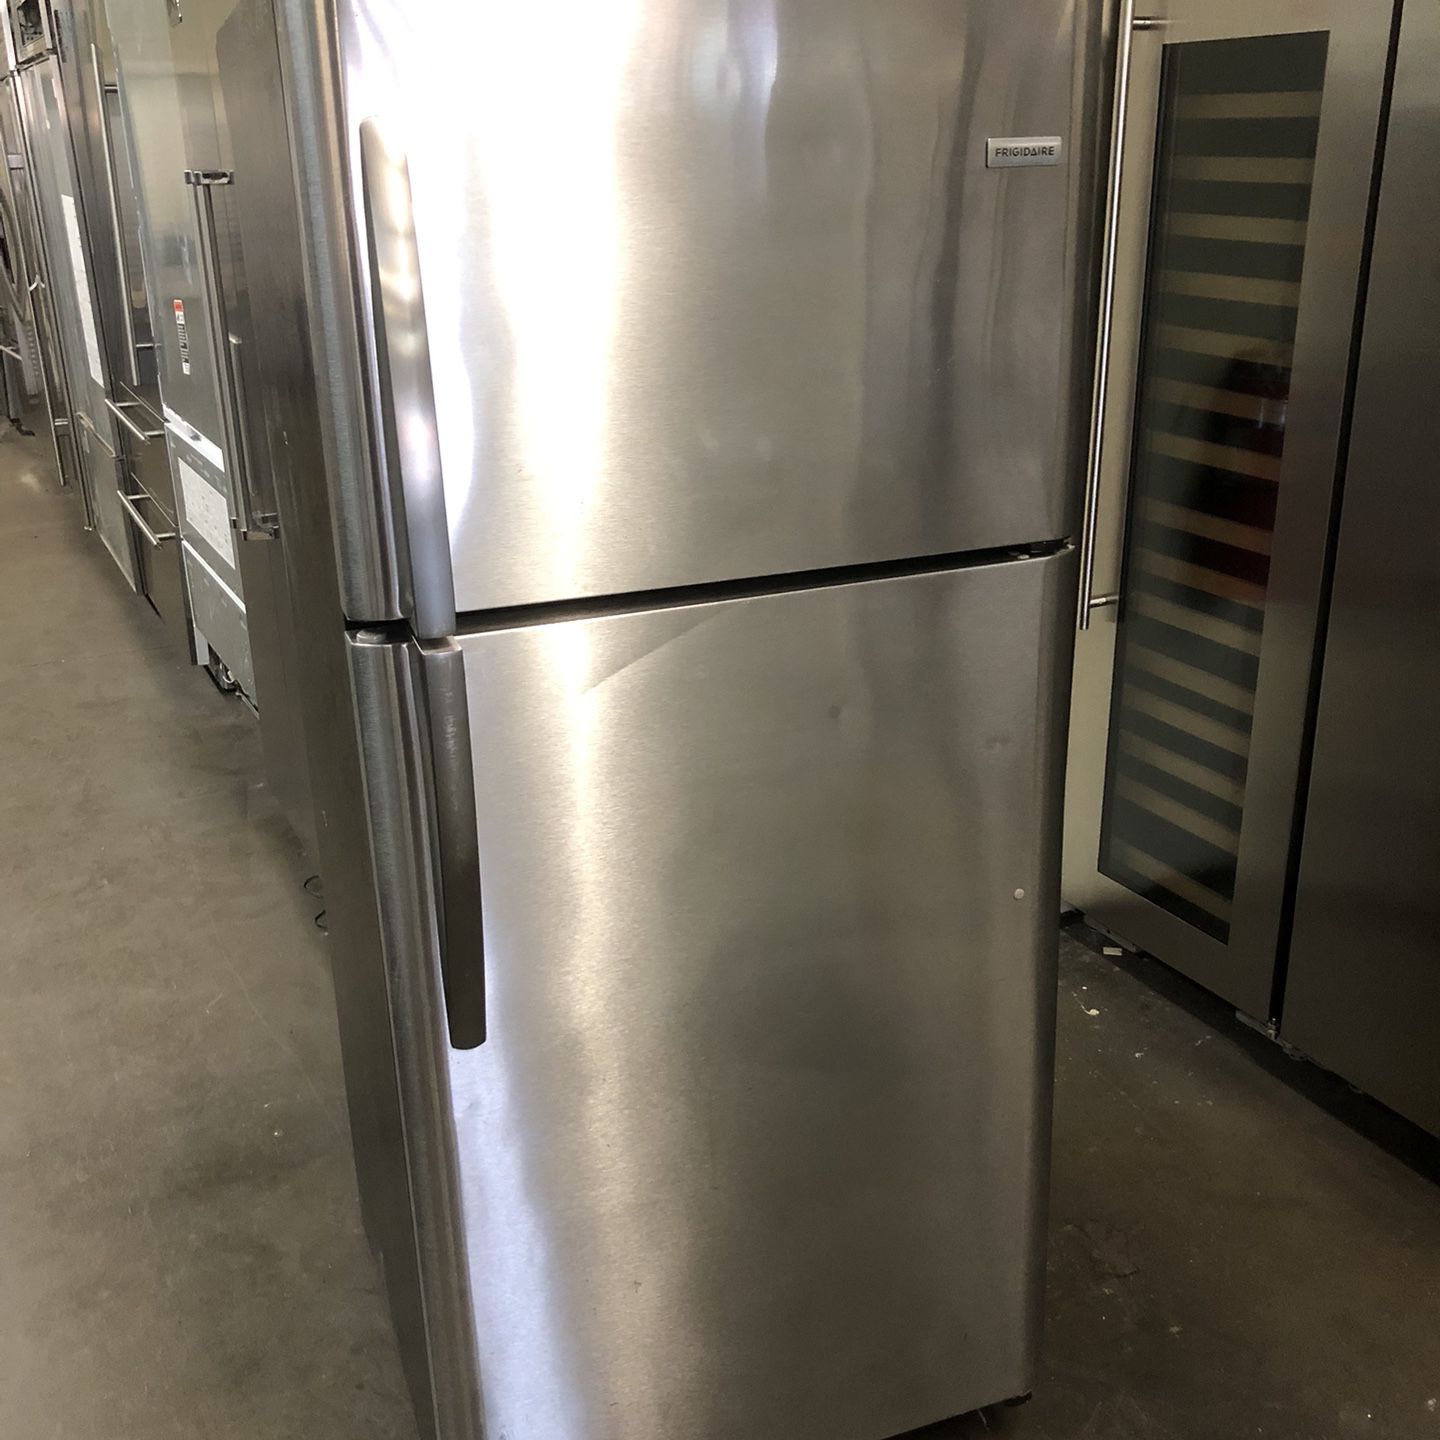 Frigidaire 20 Cu Ft Stainless Steel Apartment Size Refrigerator 